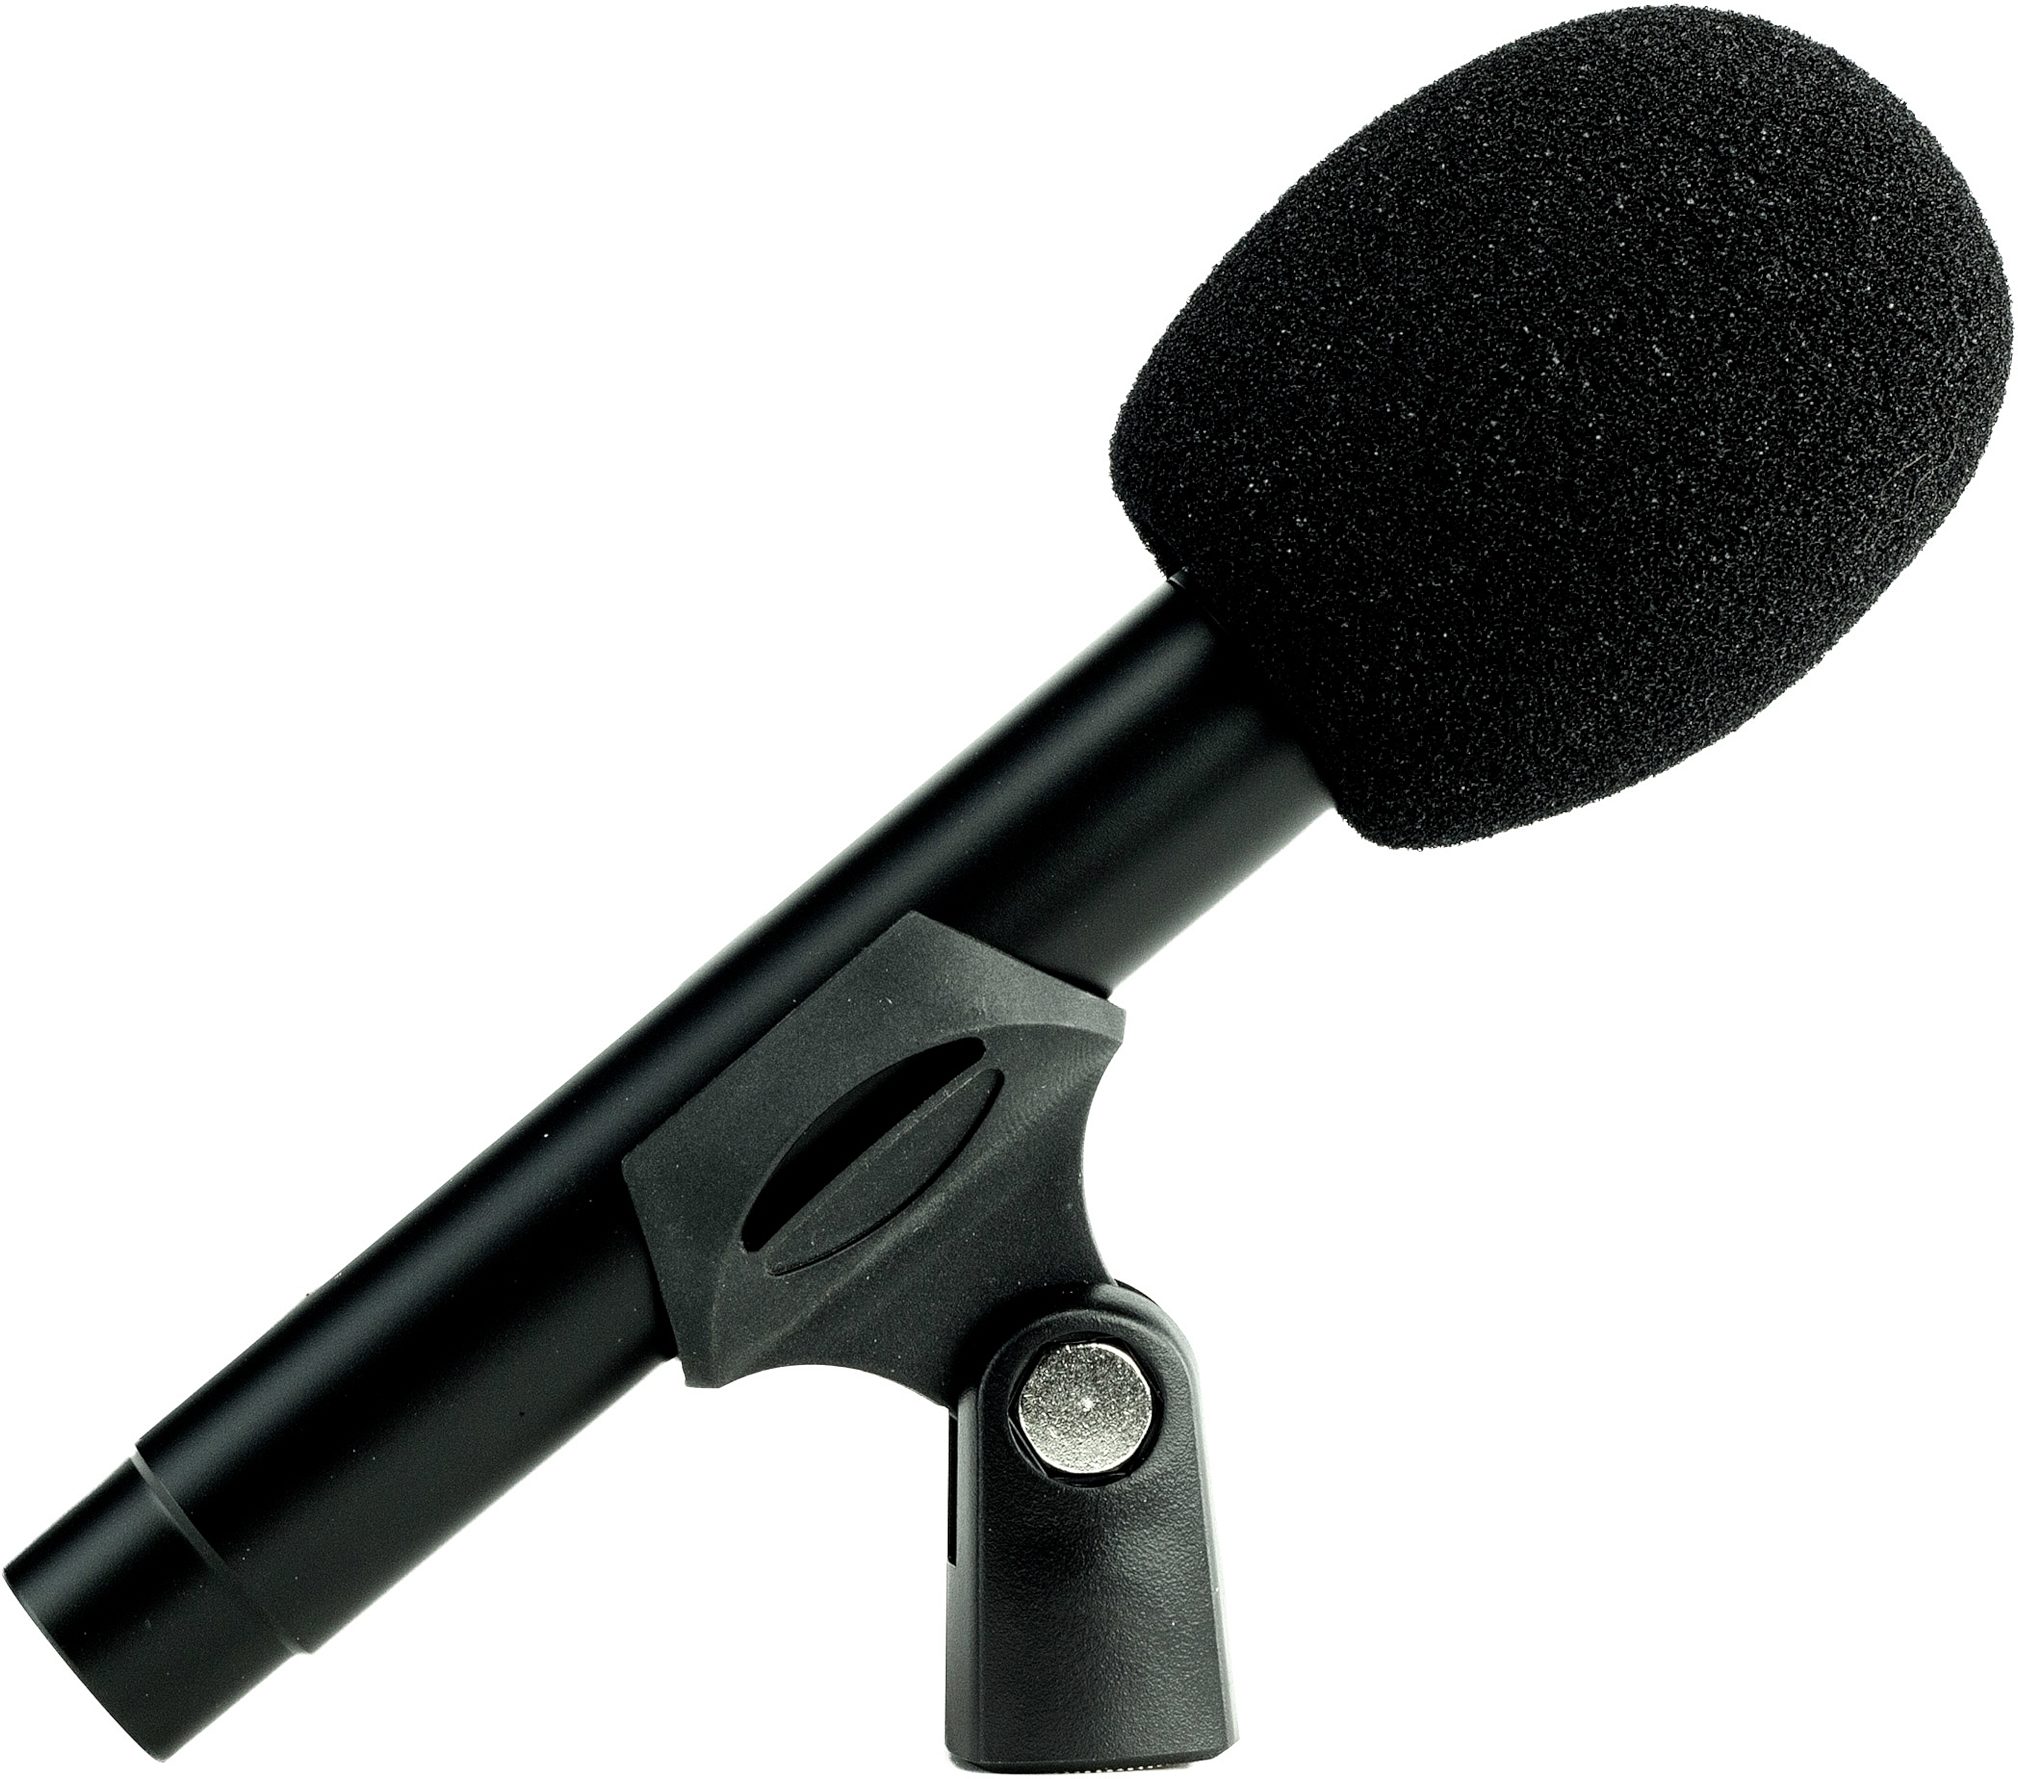 supercardioid polar pattern and wide dynamic range Nady SPC-15 Condenser Microphone Tailored to enhance vocals